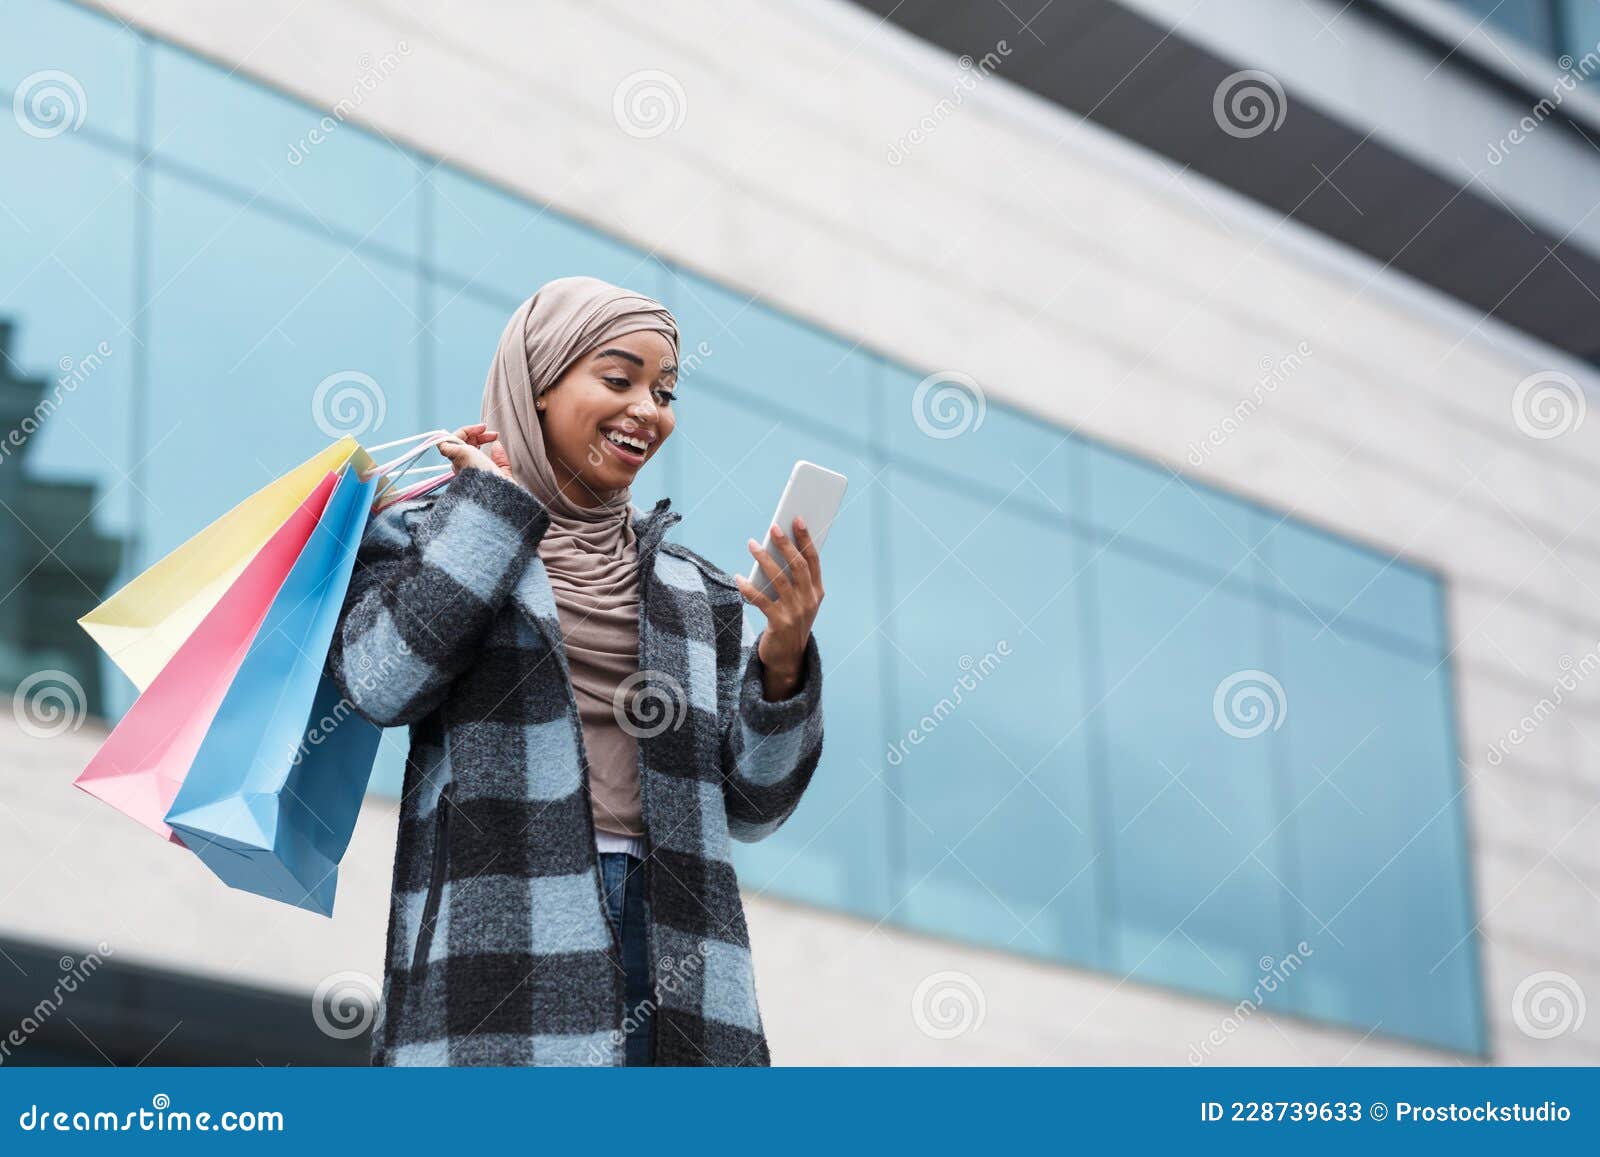 Great offer from online store, mobile app and shopping in city outdoor. Happy cute millennial islamic black female in hijab with multicolored purchases bags typing on phone near shop window of mall